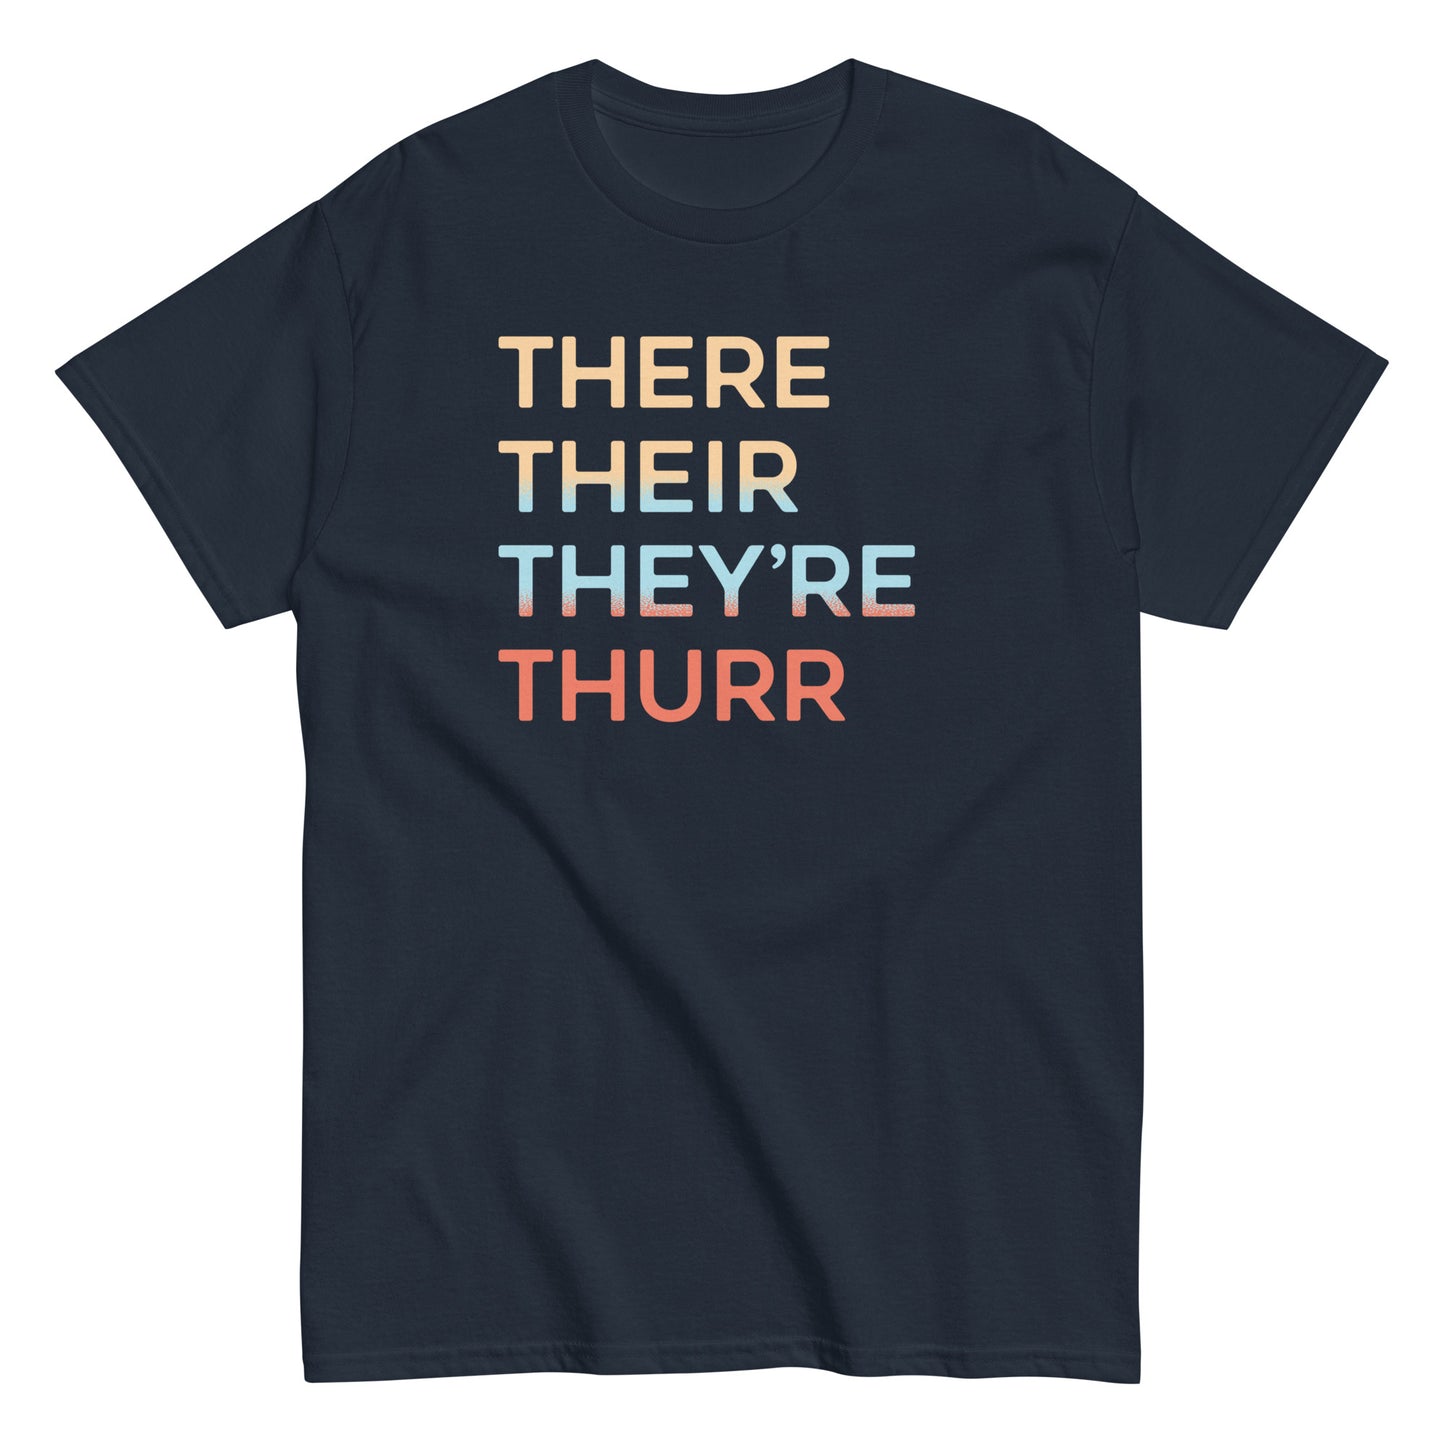 There Their They're Thurr Men's Classic Tee